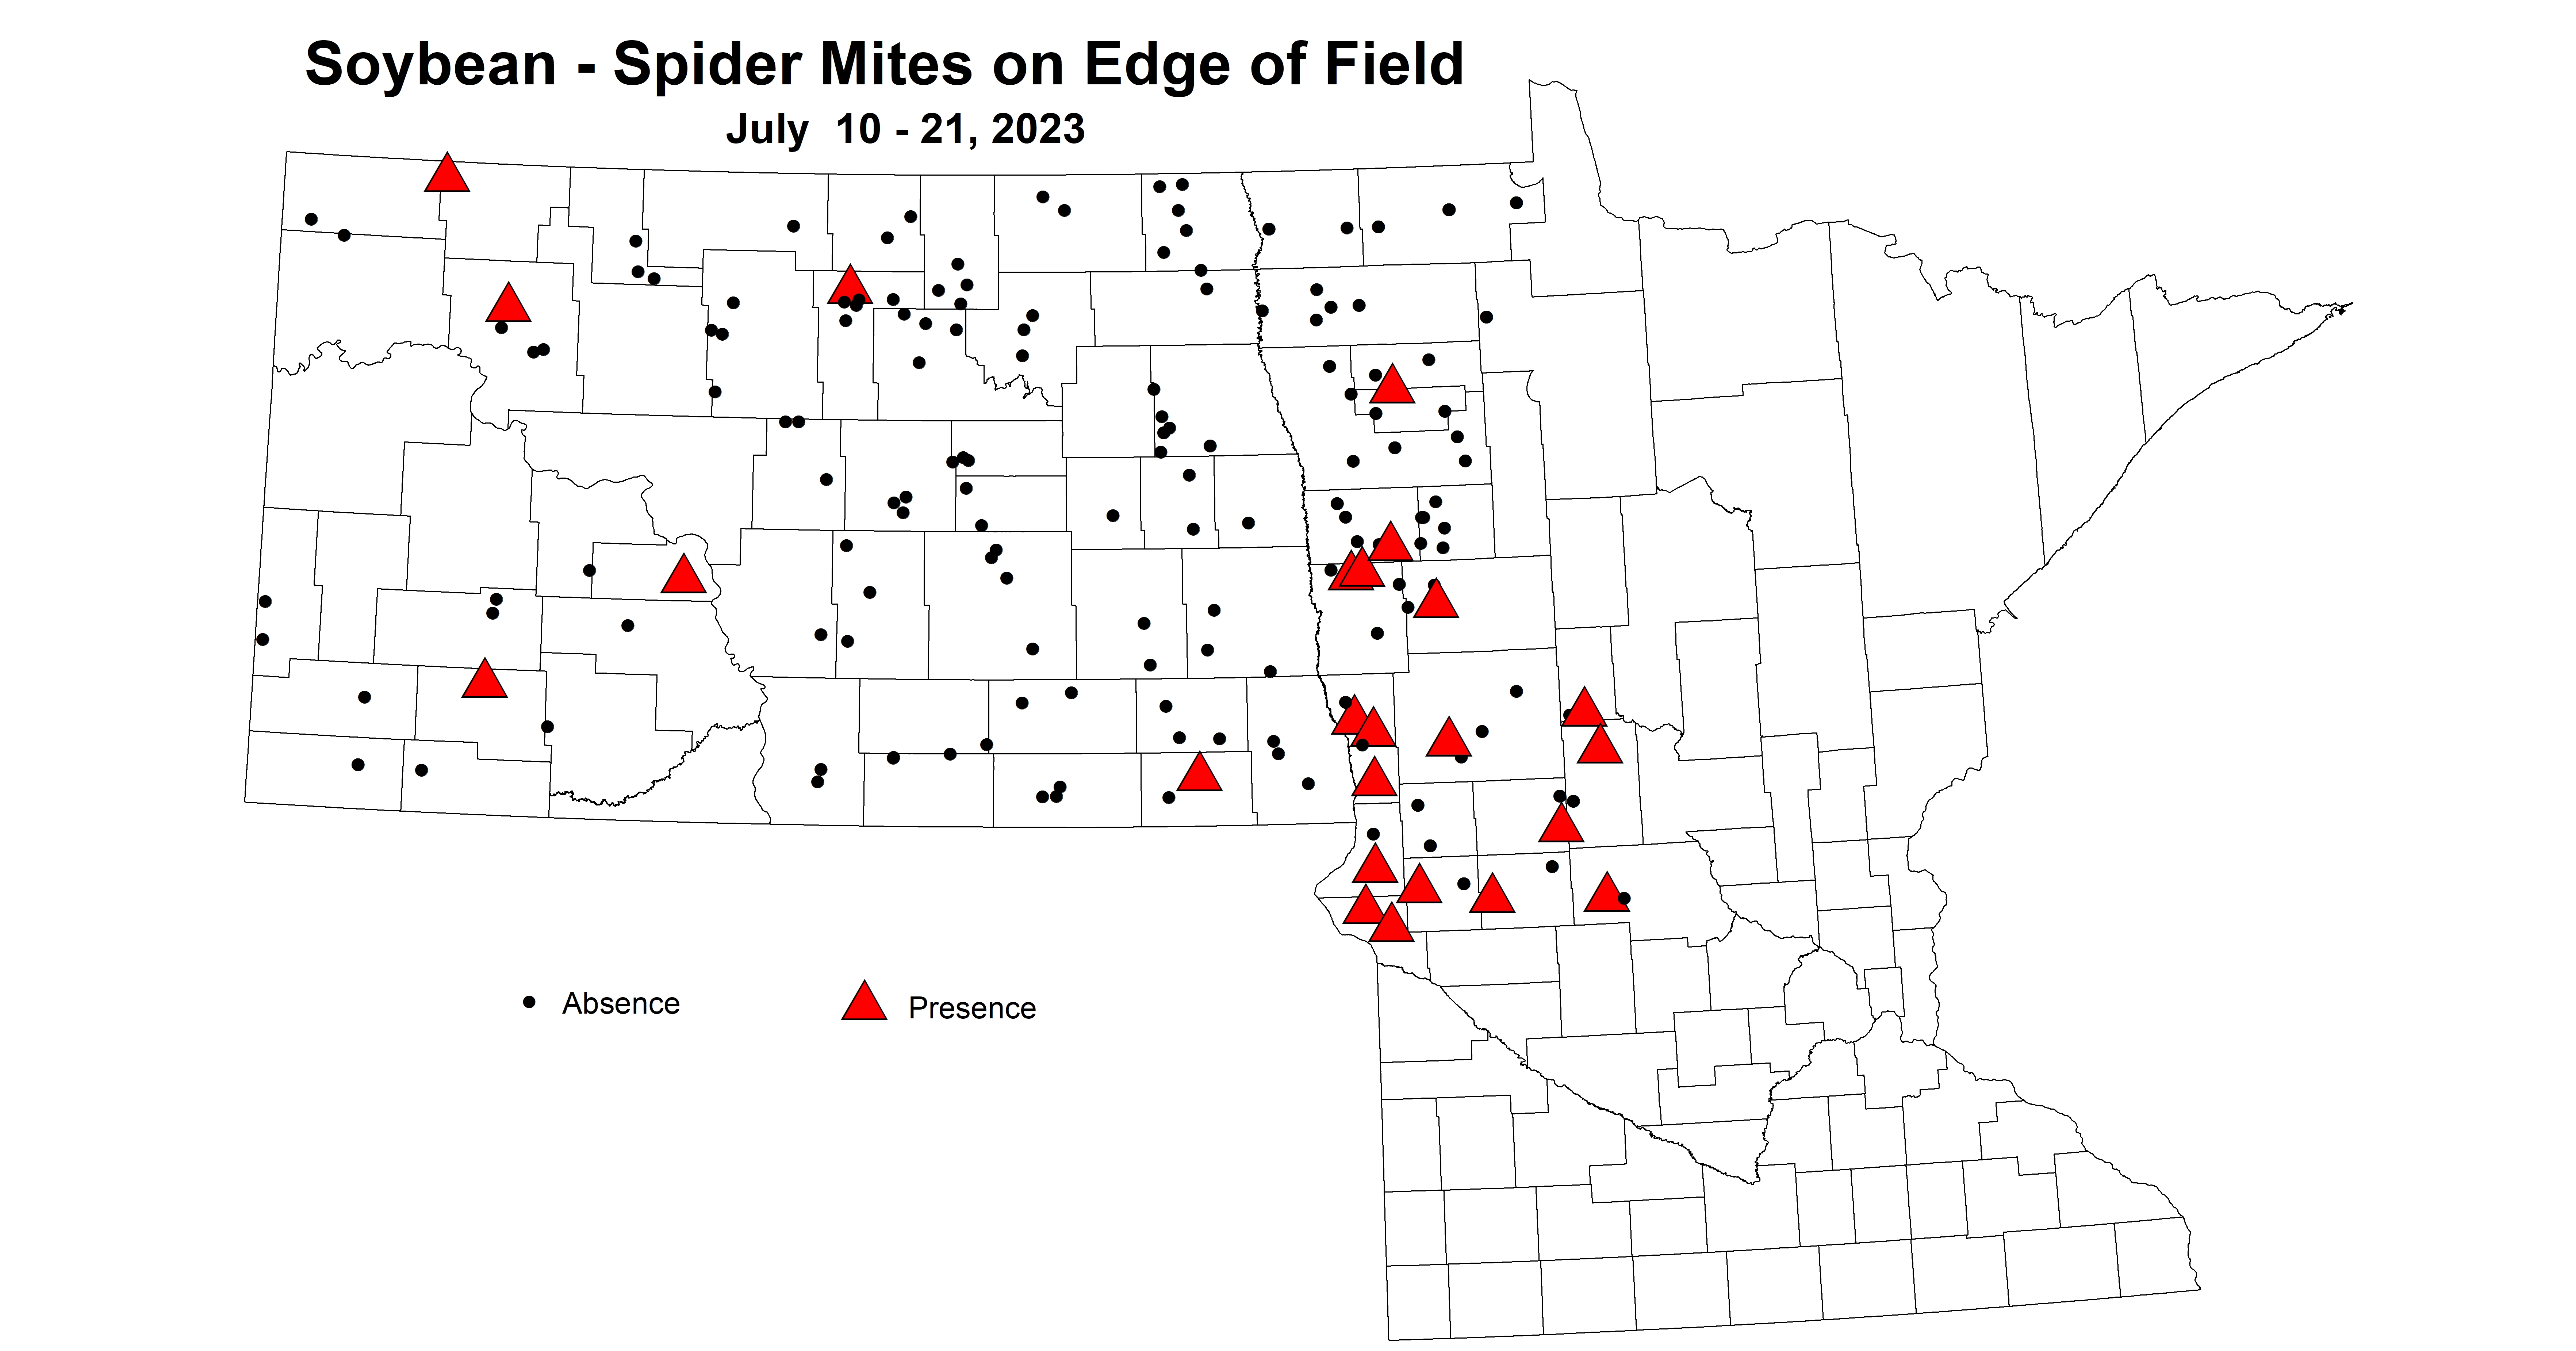 soybean spider mites on edge of field July 10-21 2023